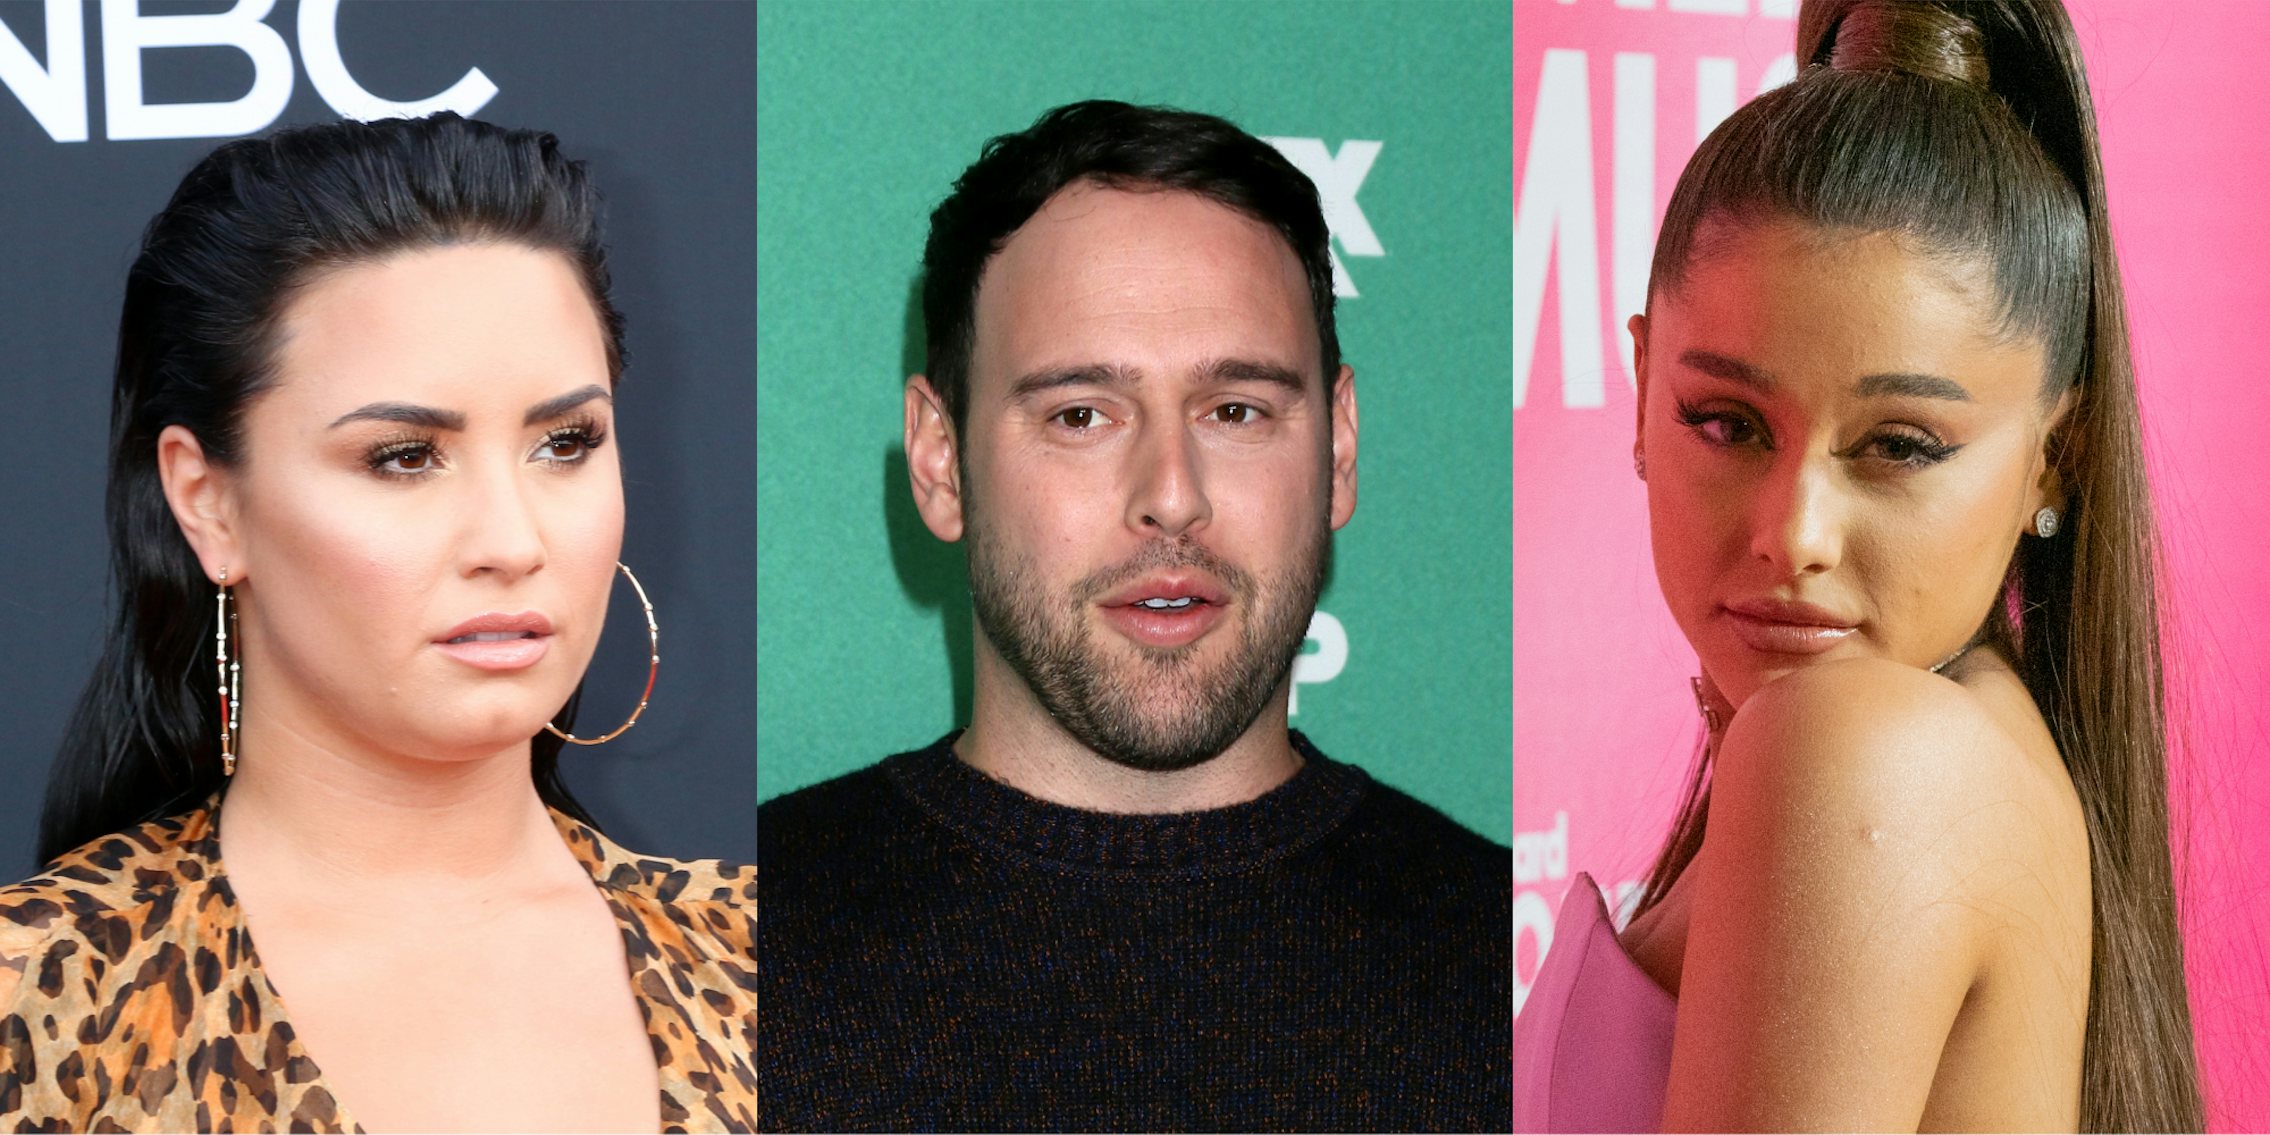 Demi Lovato in front of grey background (l) Scooter Braun in front of green background (c) Ariana Grande in front of pink background (r)